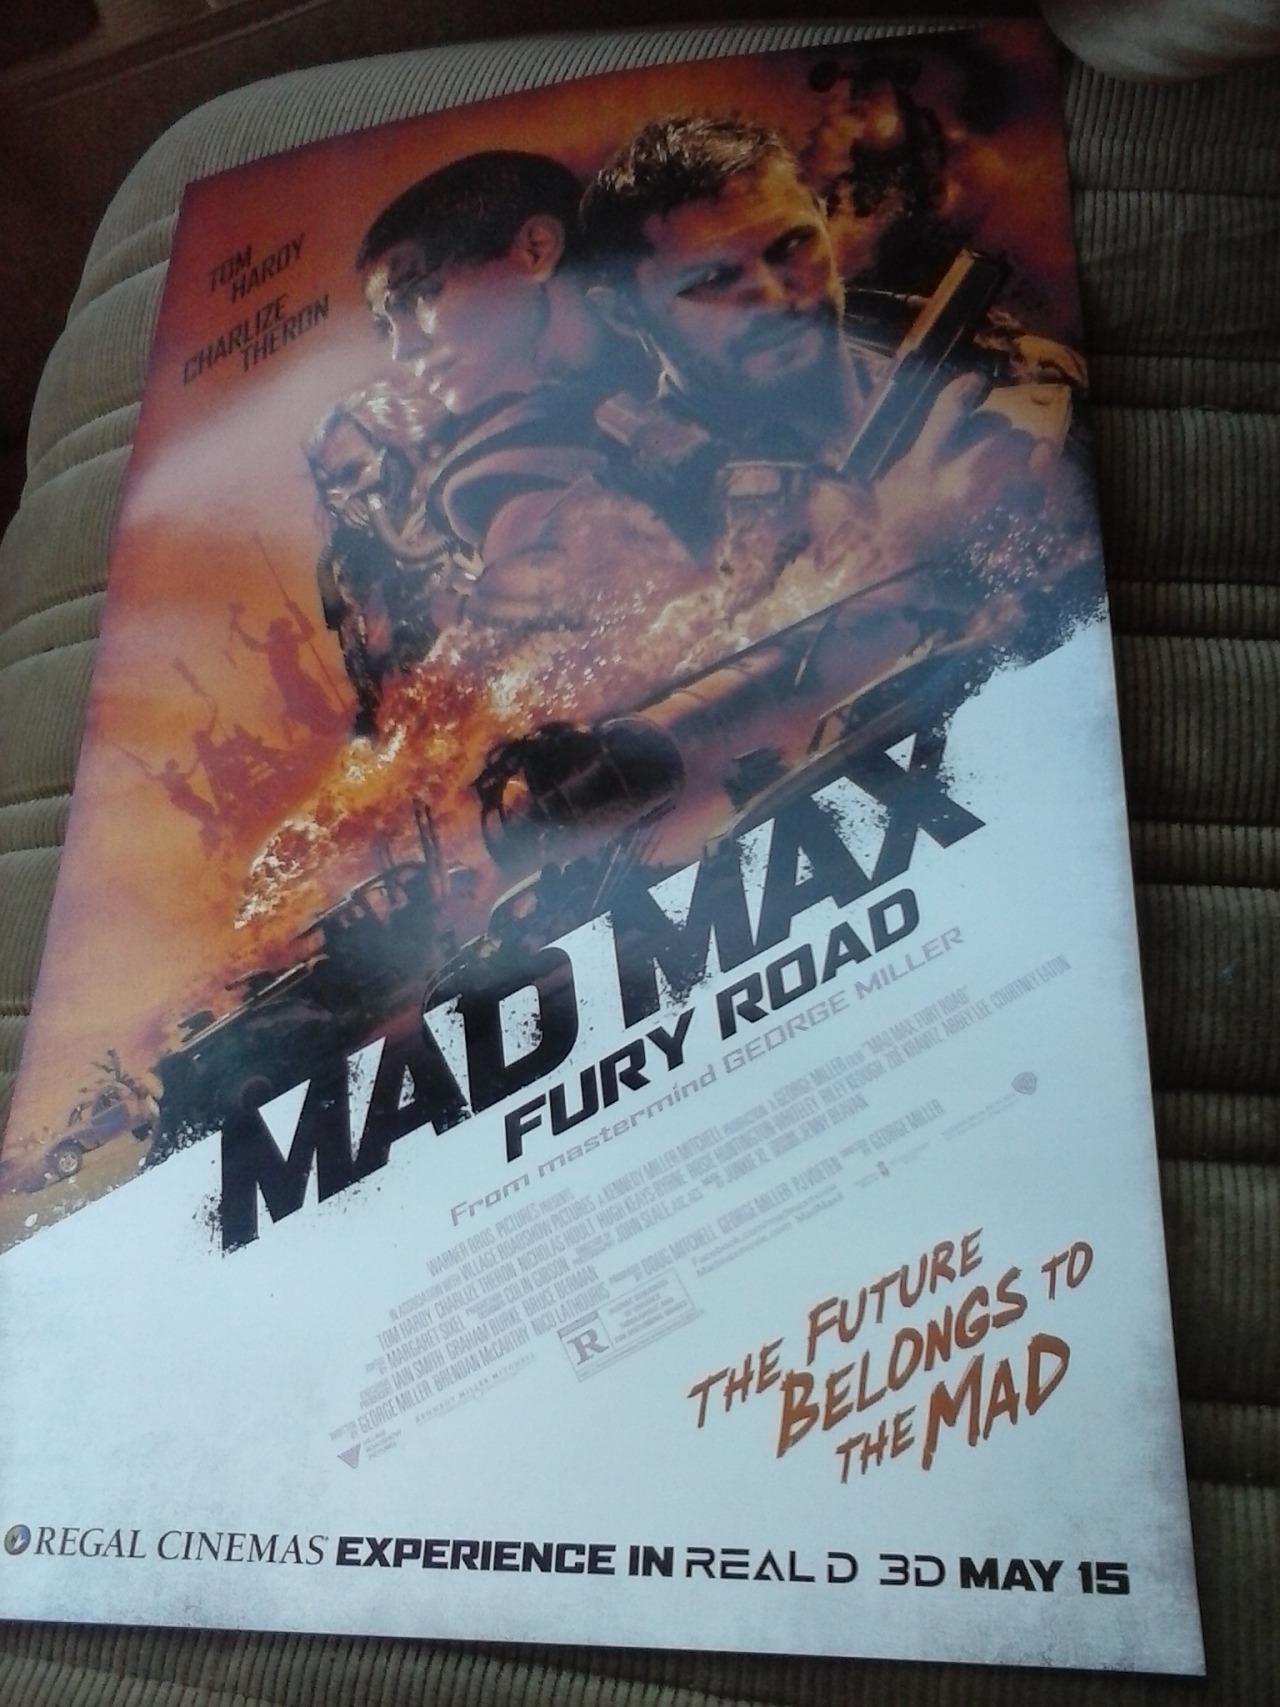 Got this sweet poster when I went to go see this sweet movie.